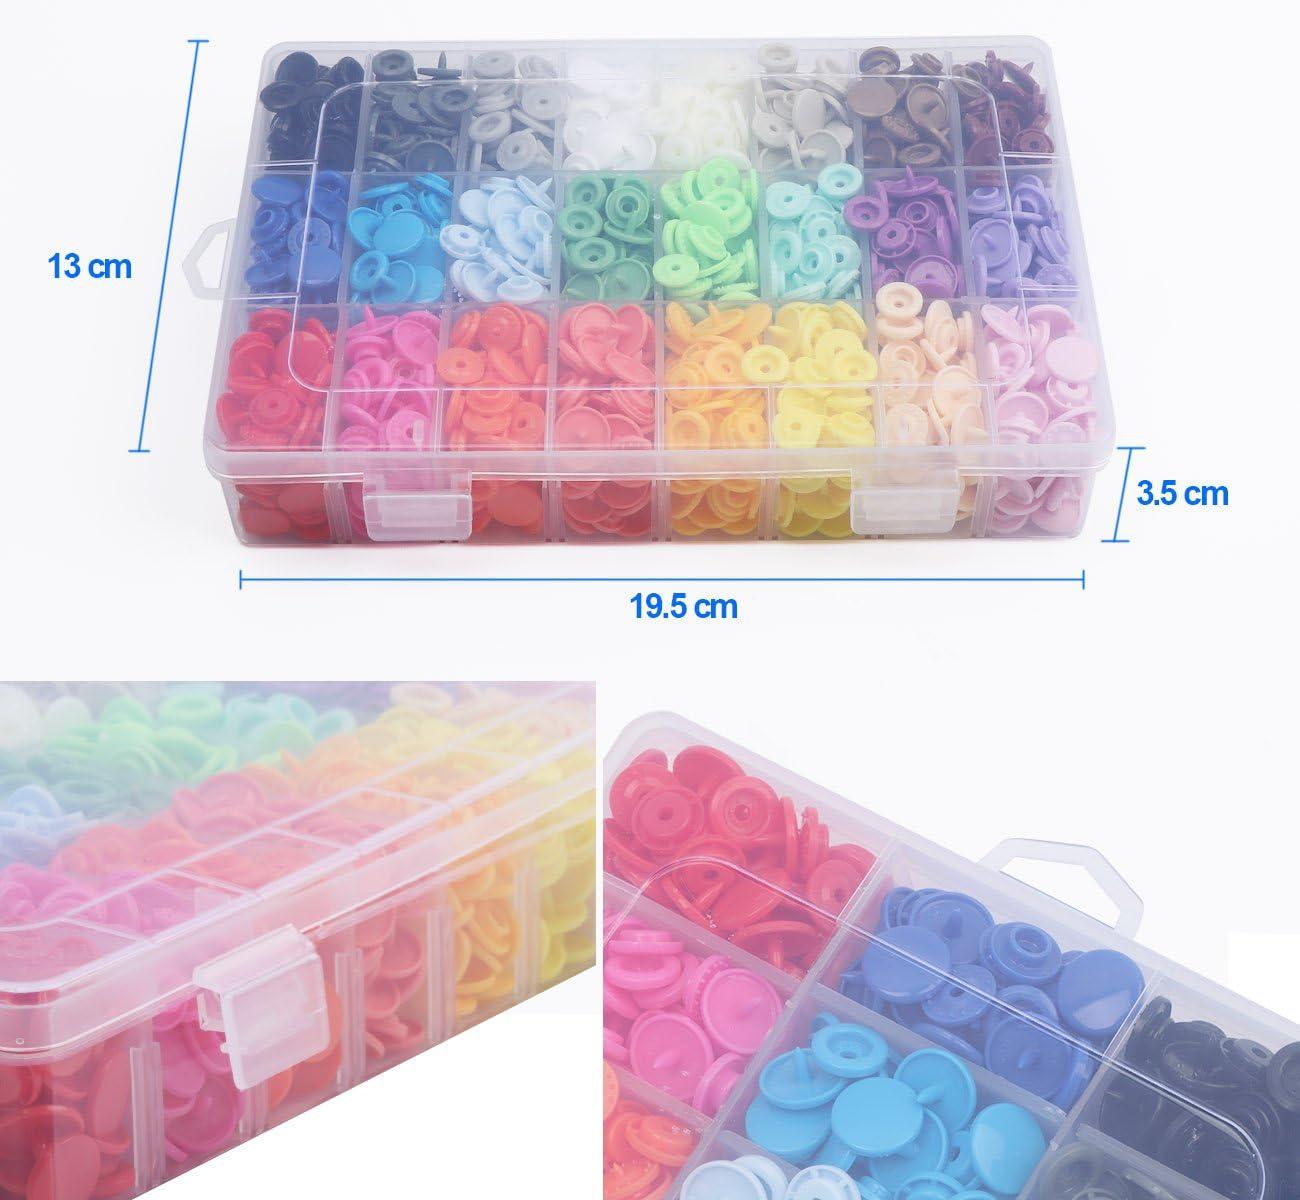 GCP Products 720 Sets 36 Color Kam Snaps Buttons With Storage